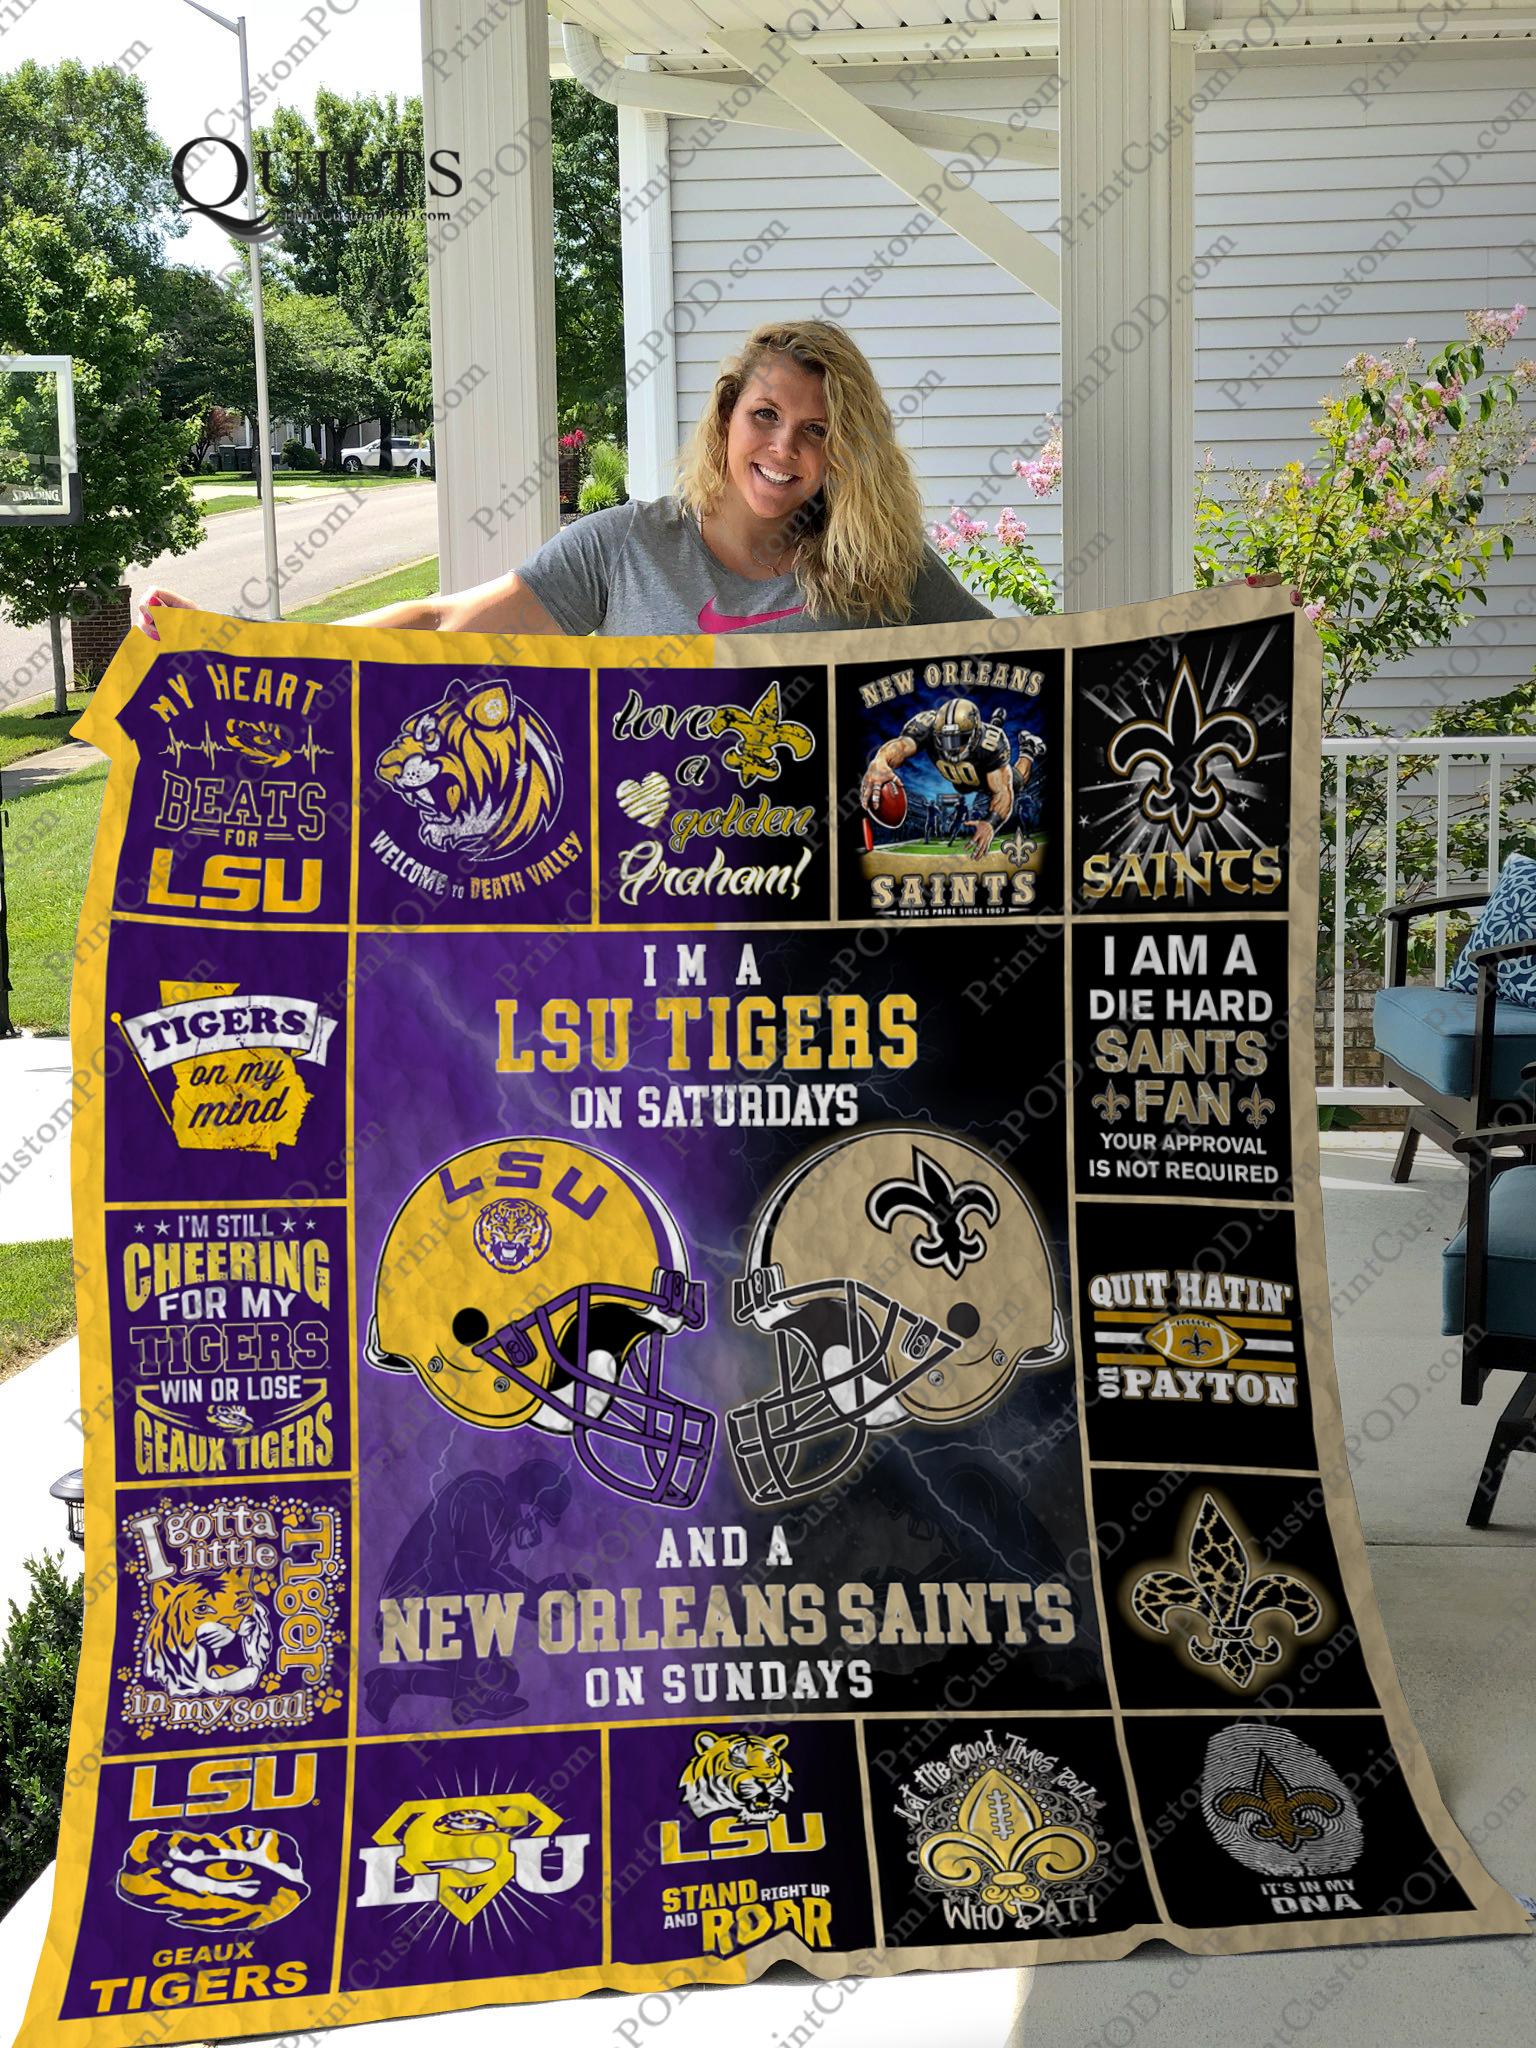 I’m a lsu tigers on saturdays and a new orleans saints on sundays blanket 4